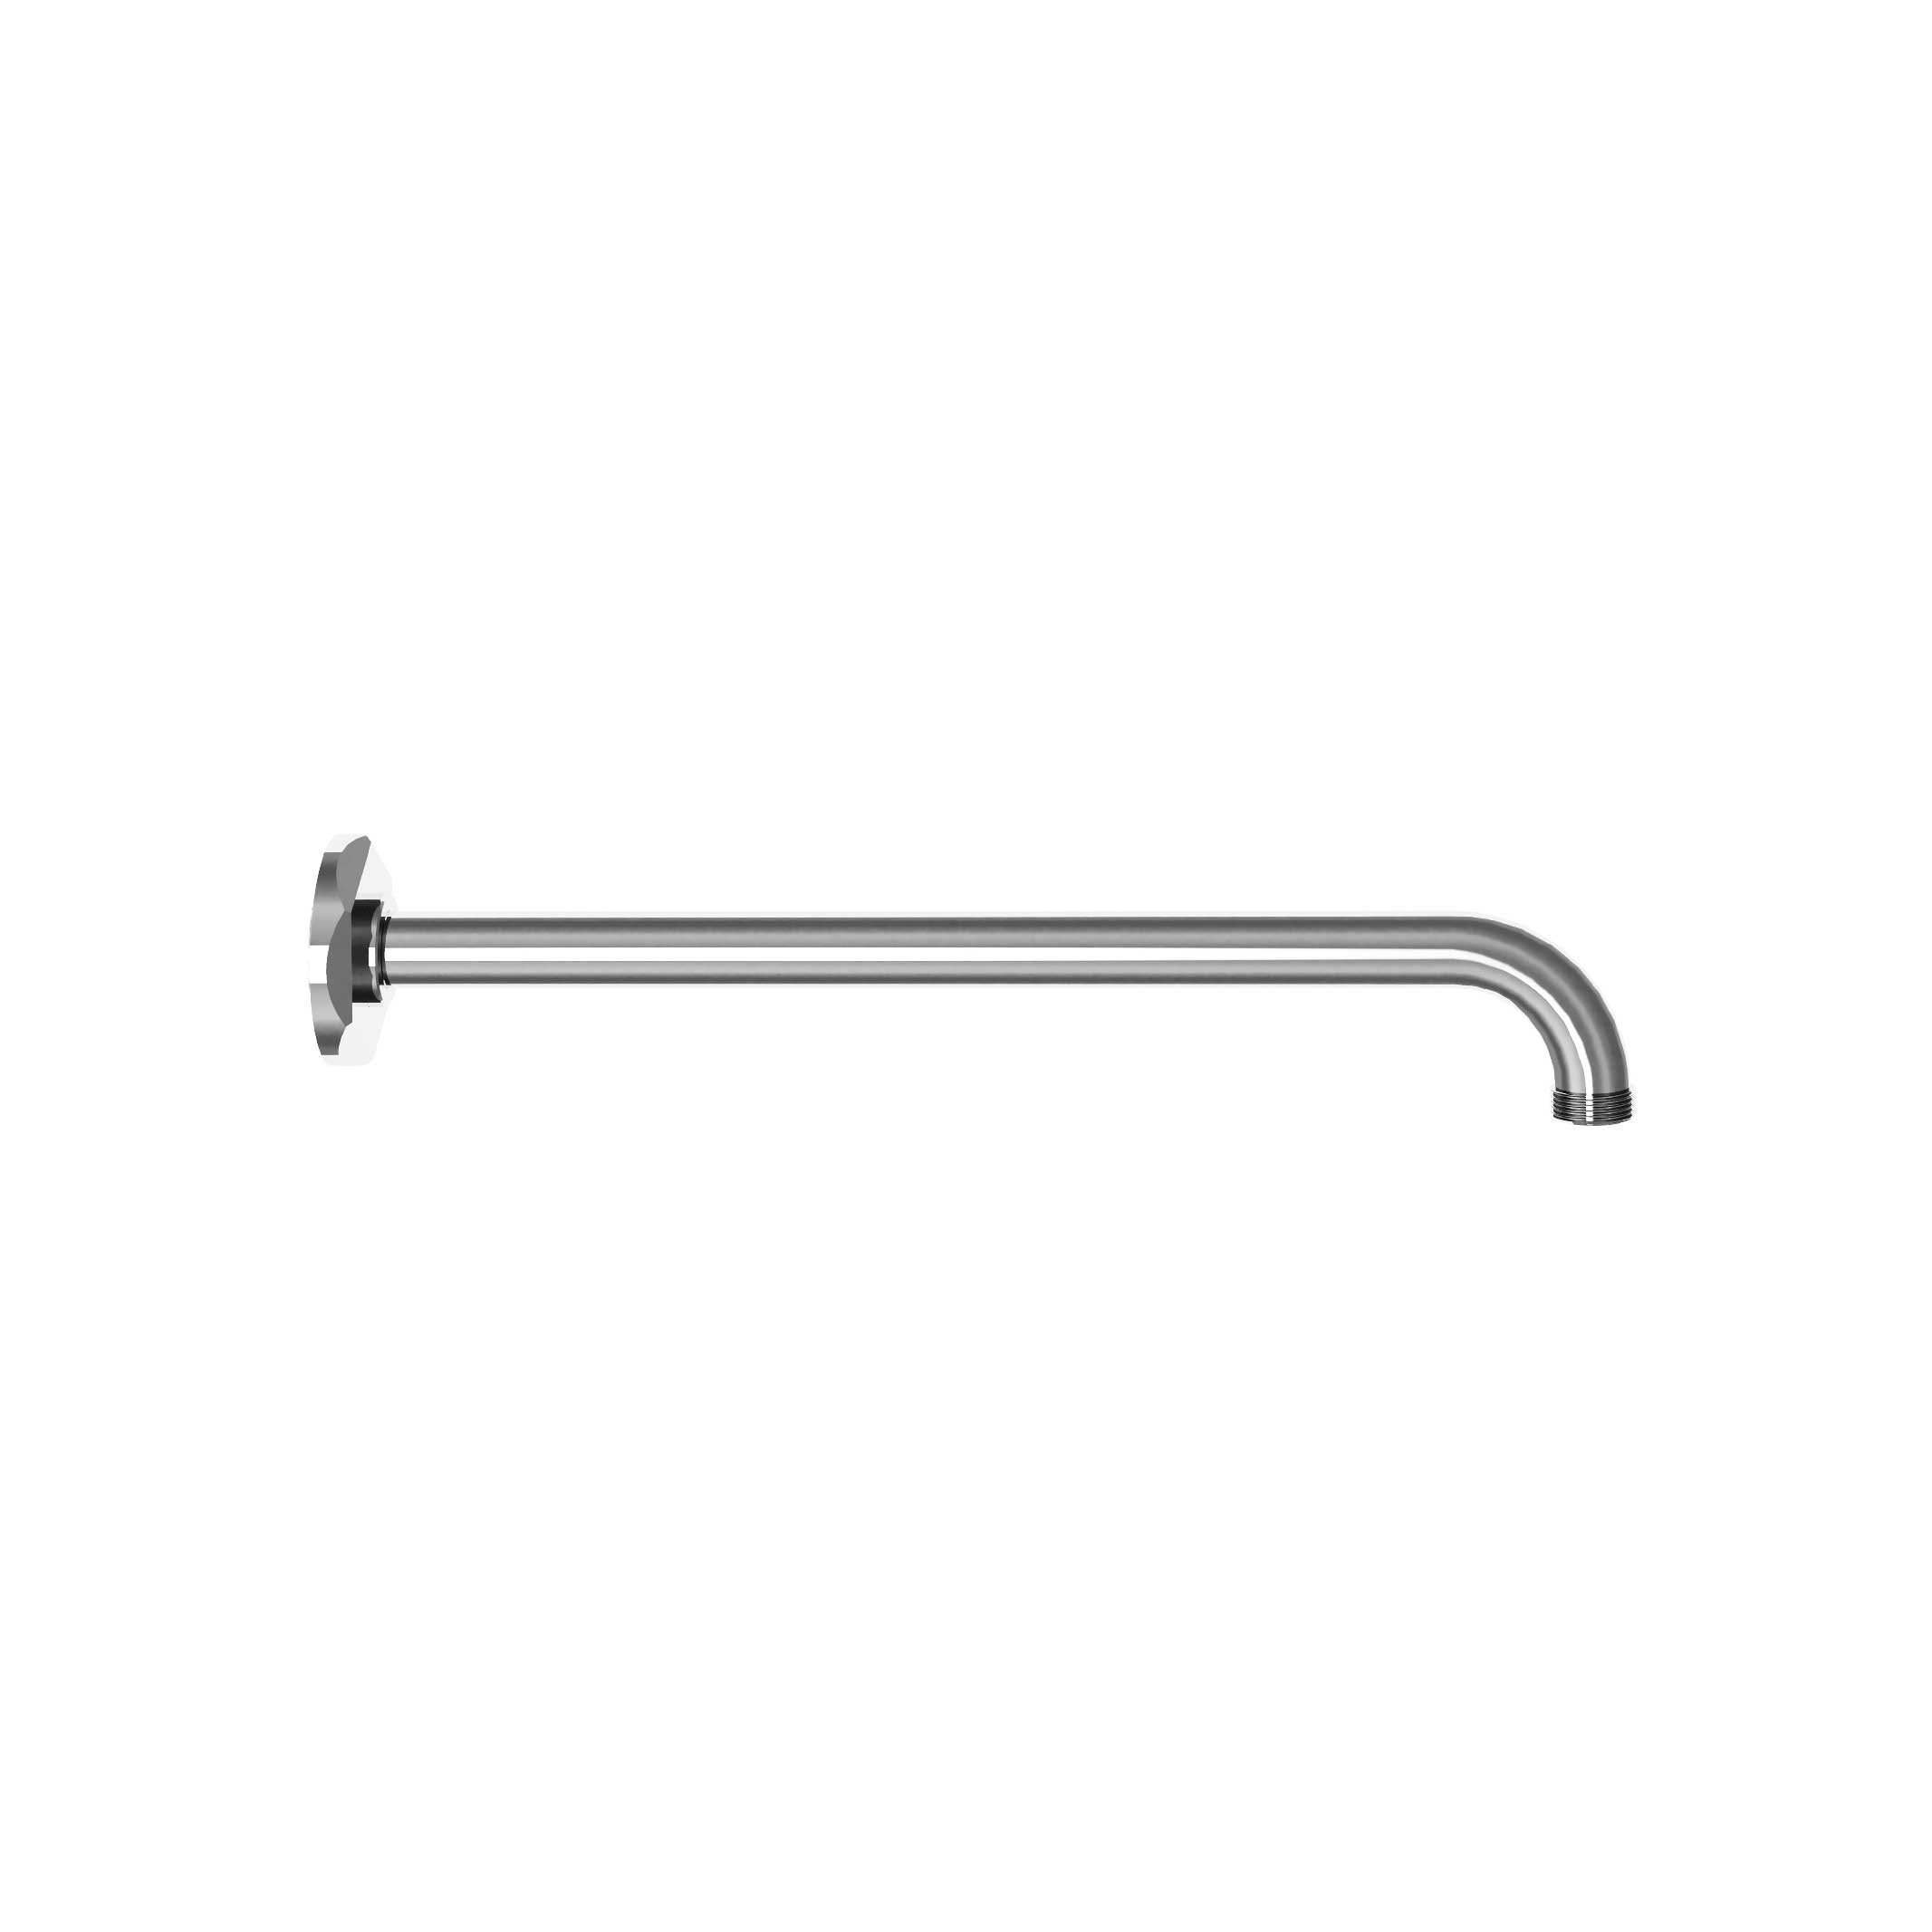 M13-2W301 Wall mounted shower arm 300mm